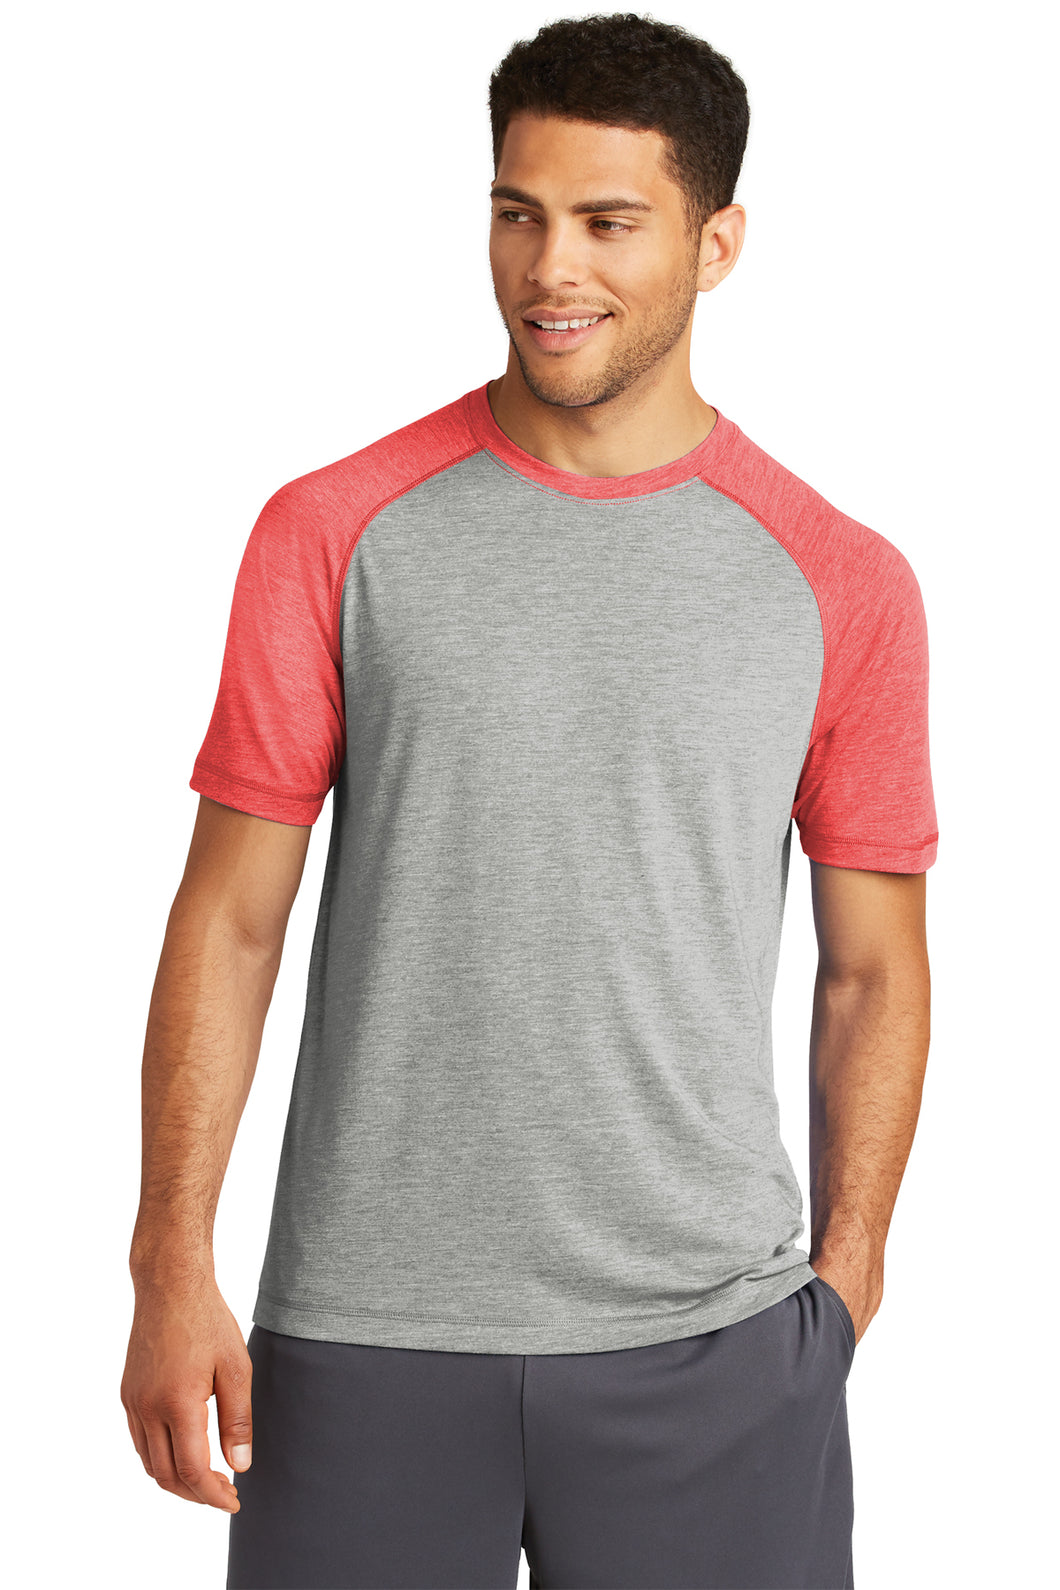 Fusion Performance Top - Red/Grey